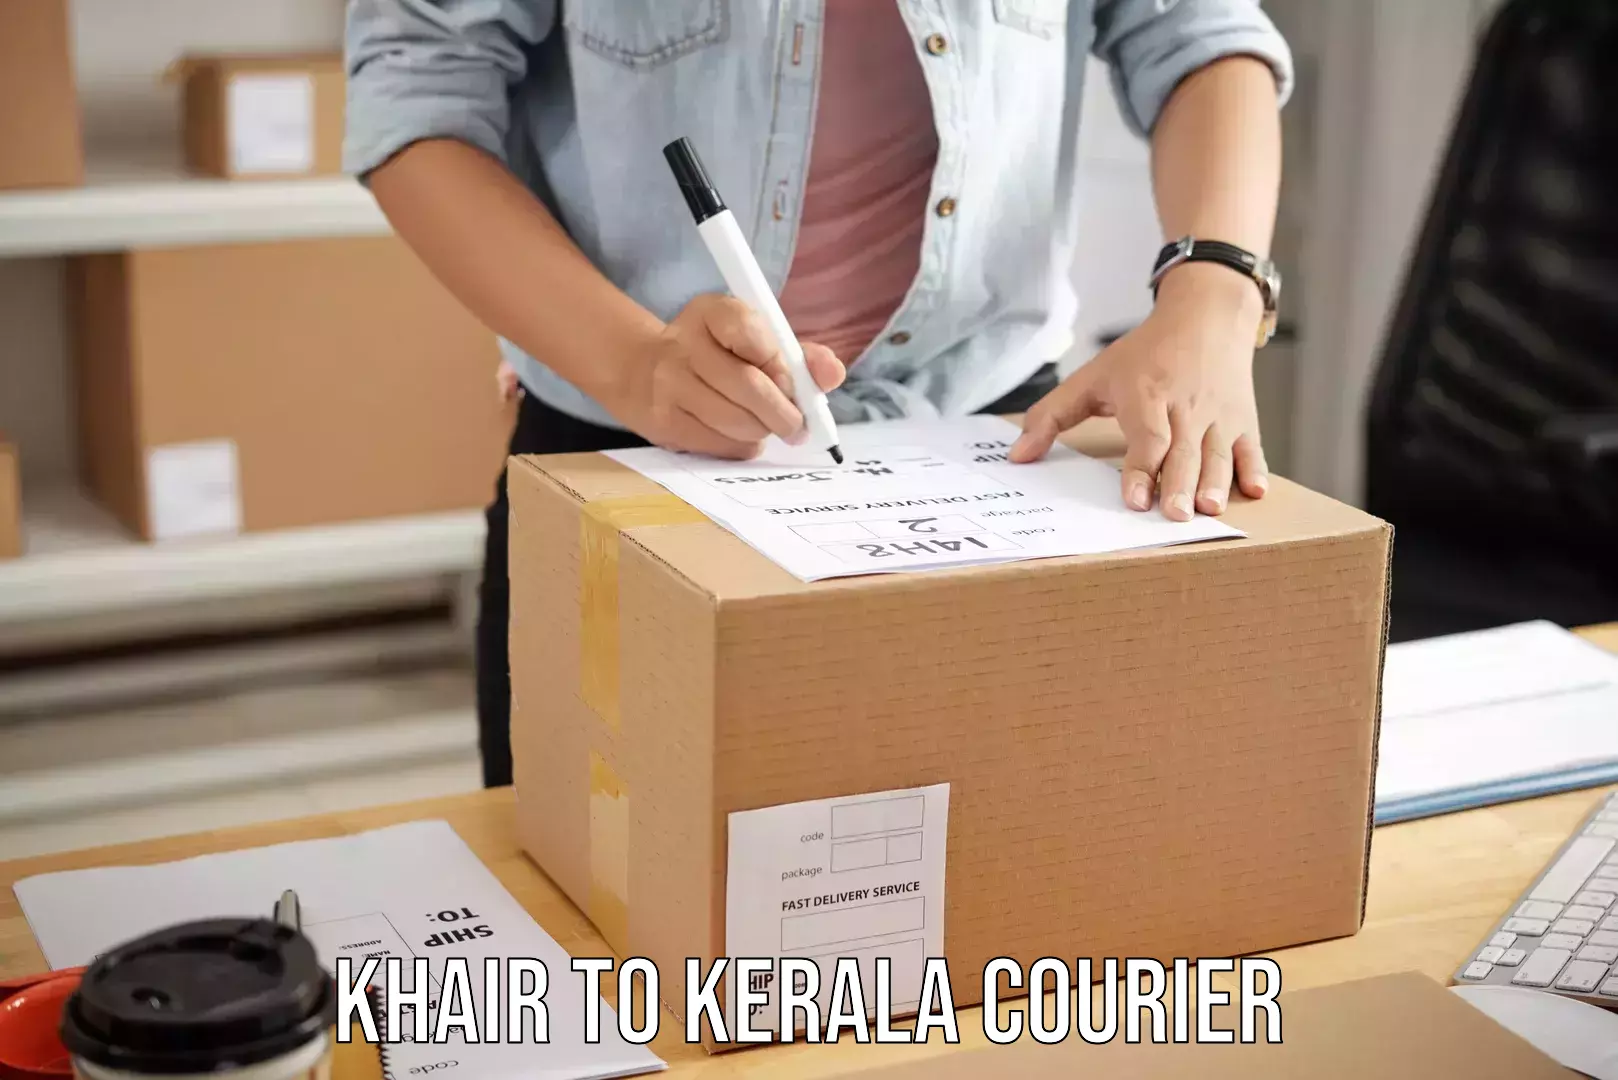 Luggage shipping specialists Khair to Kerala